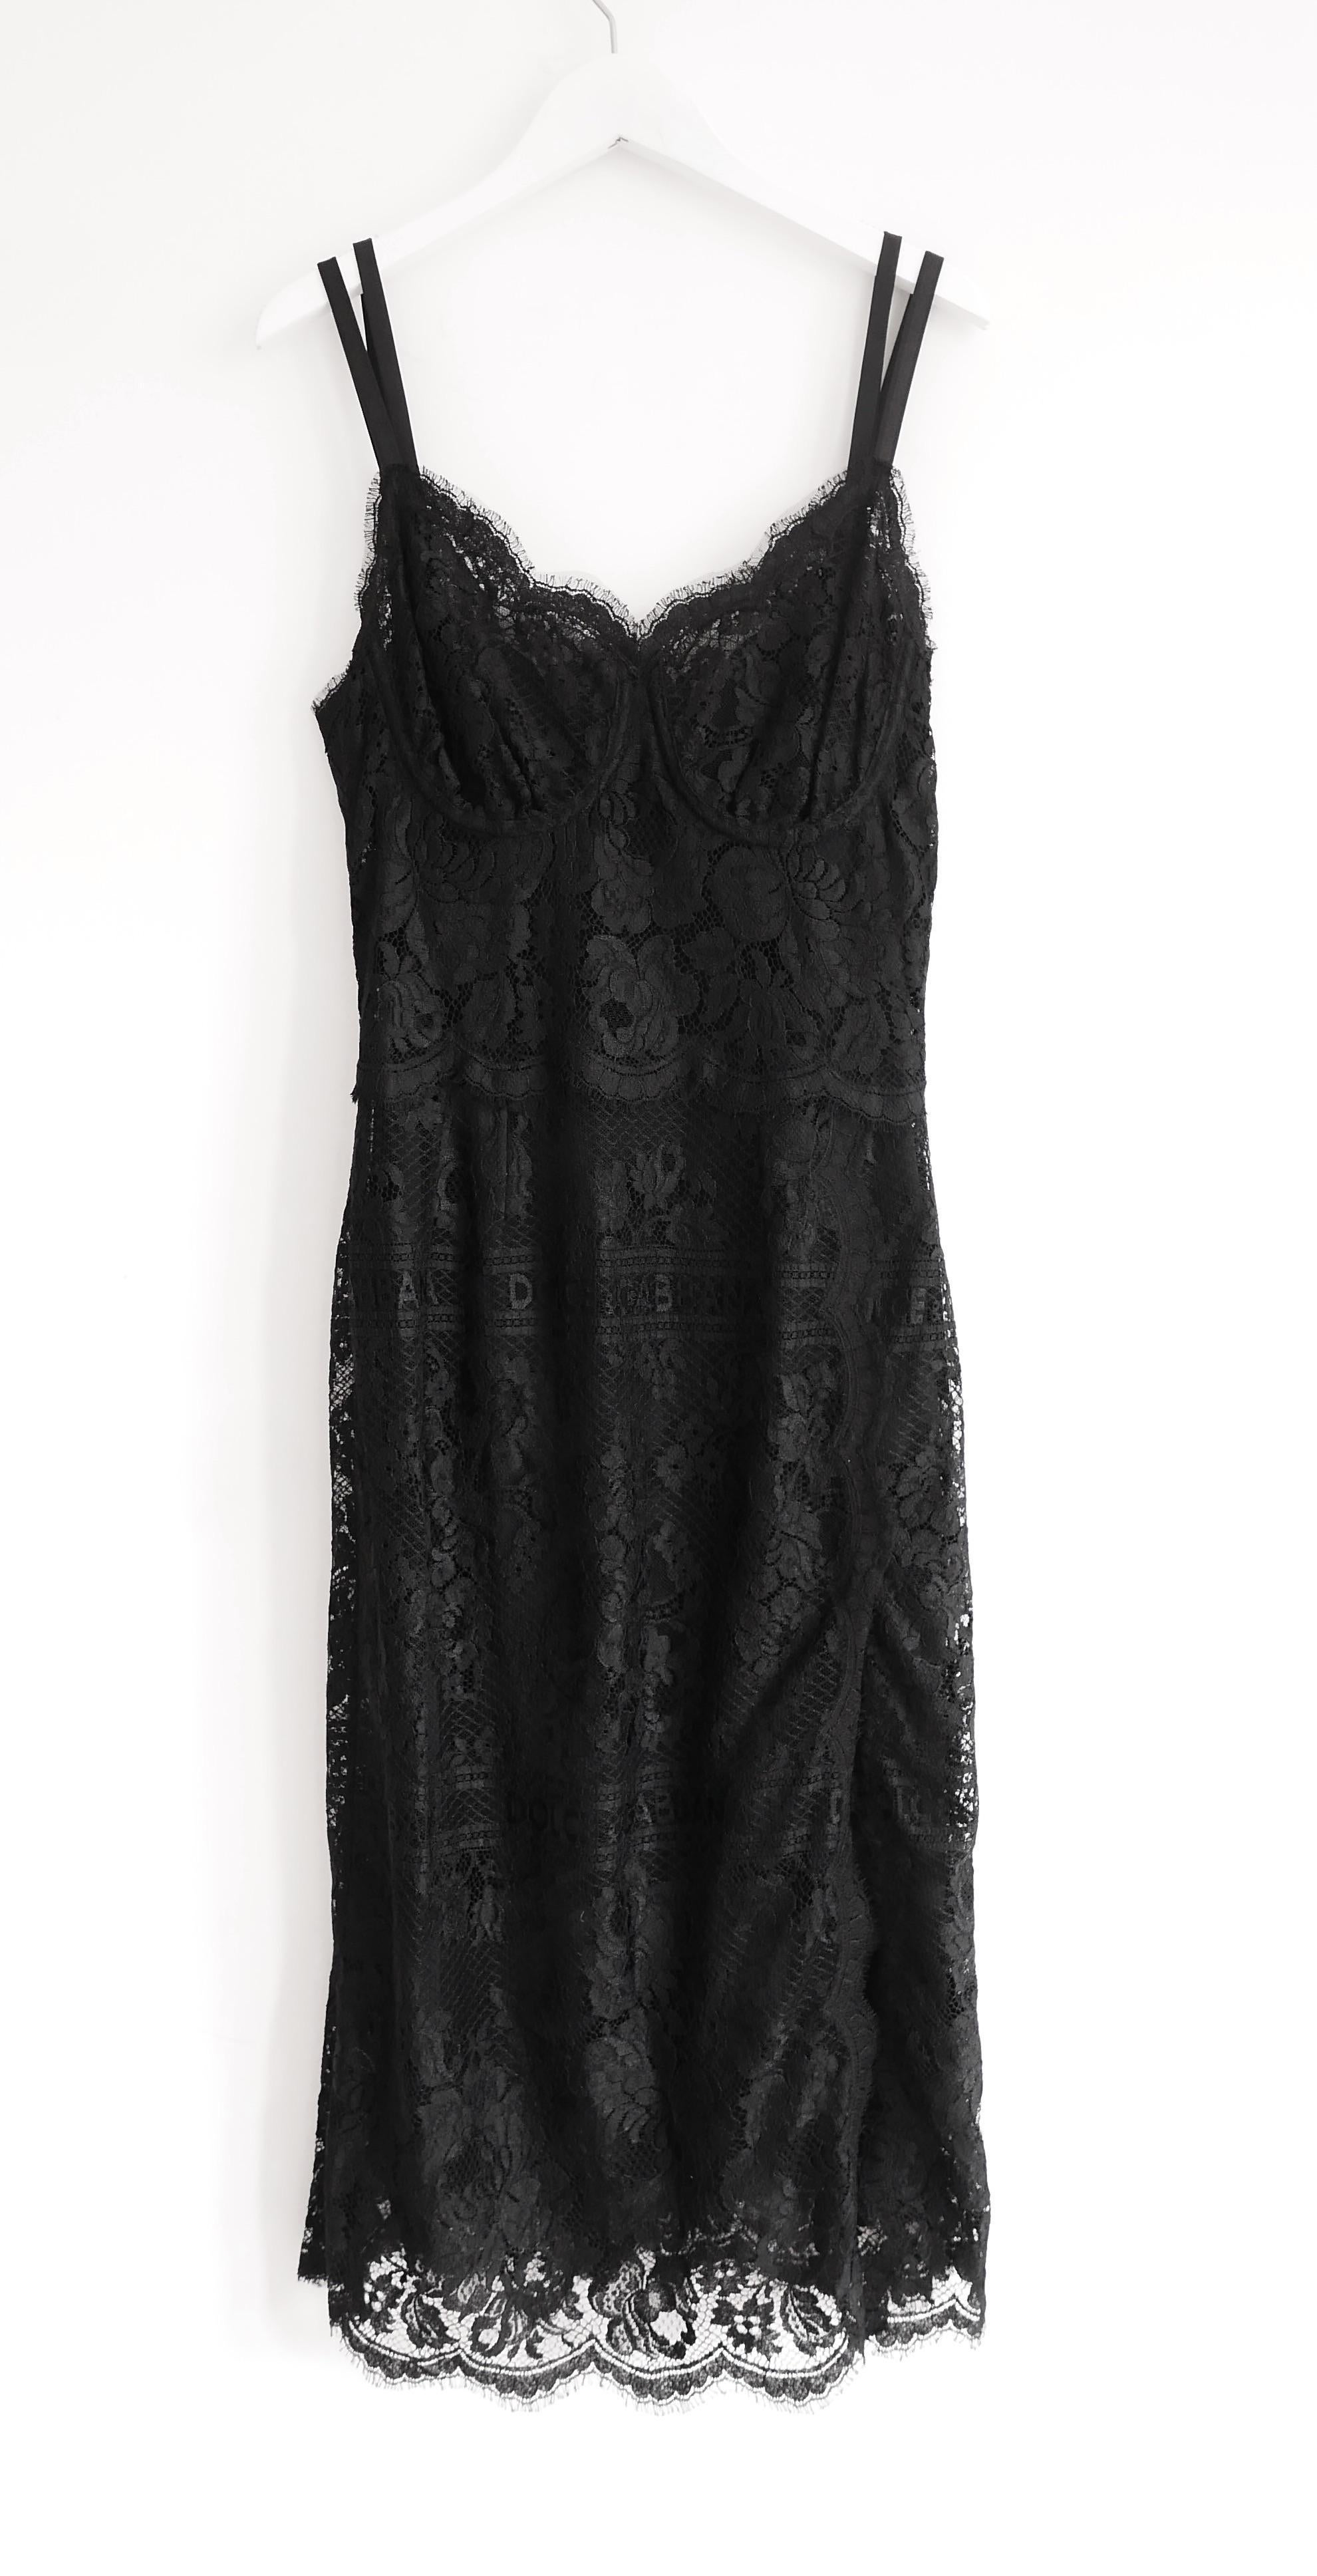 Super sexy, current collection Dolce & Gabbana black lace slip dress from their limited edition Hot Stuff capsule collection. Bought for £1850 and new with tags. 

Made from soft black lace with floral and subtle logo weave. It has separate silk